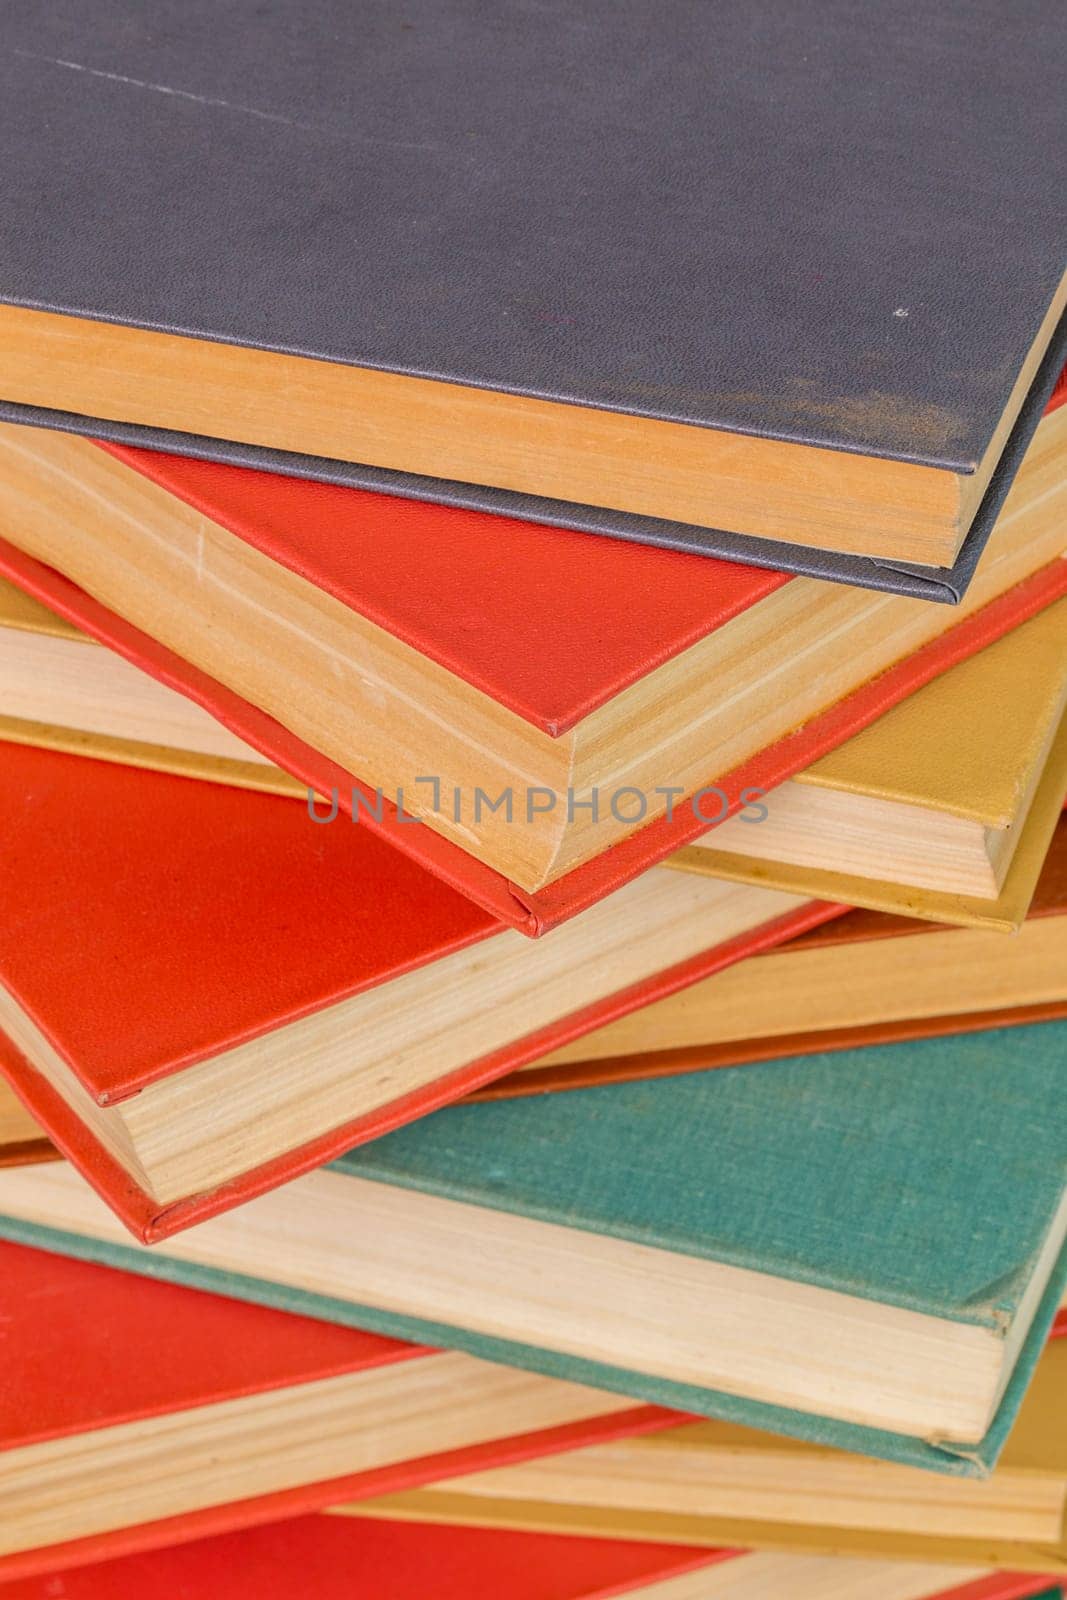 abstract books background - old red and muted green ones in a vertical stack.